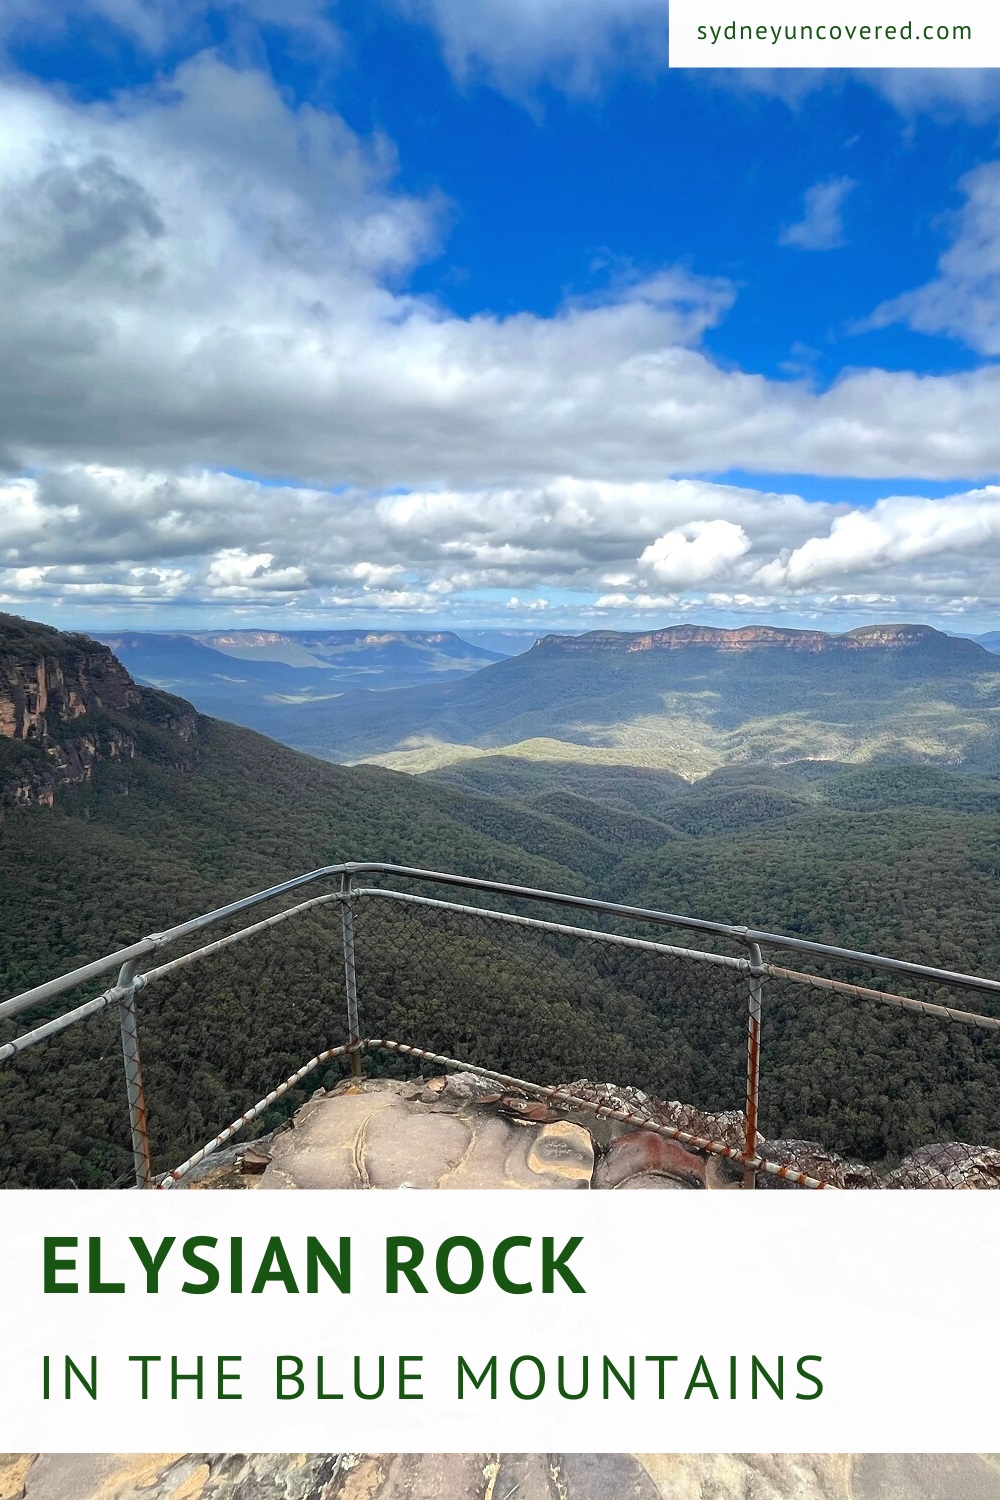 Elysian Rock Lookout and the Buttenshaw Bridge